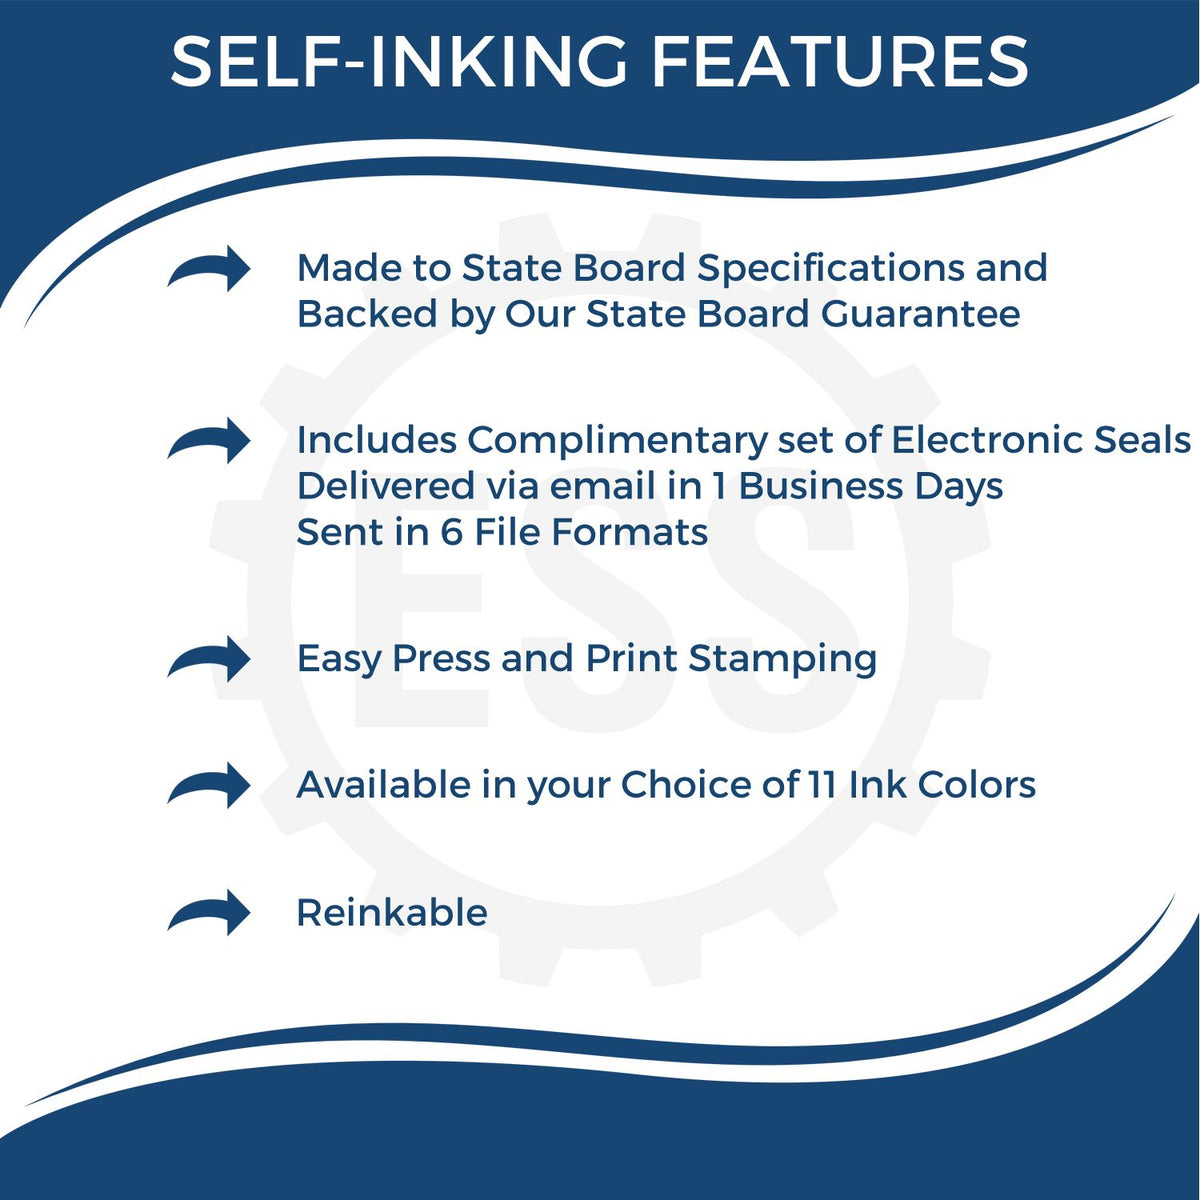 A picture of an infographic highlighting the selling points for the Self-Inking Rectangular Rhode Island Notary Stamp